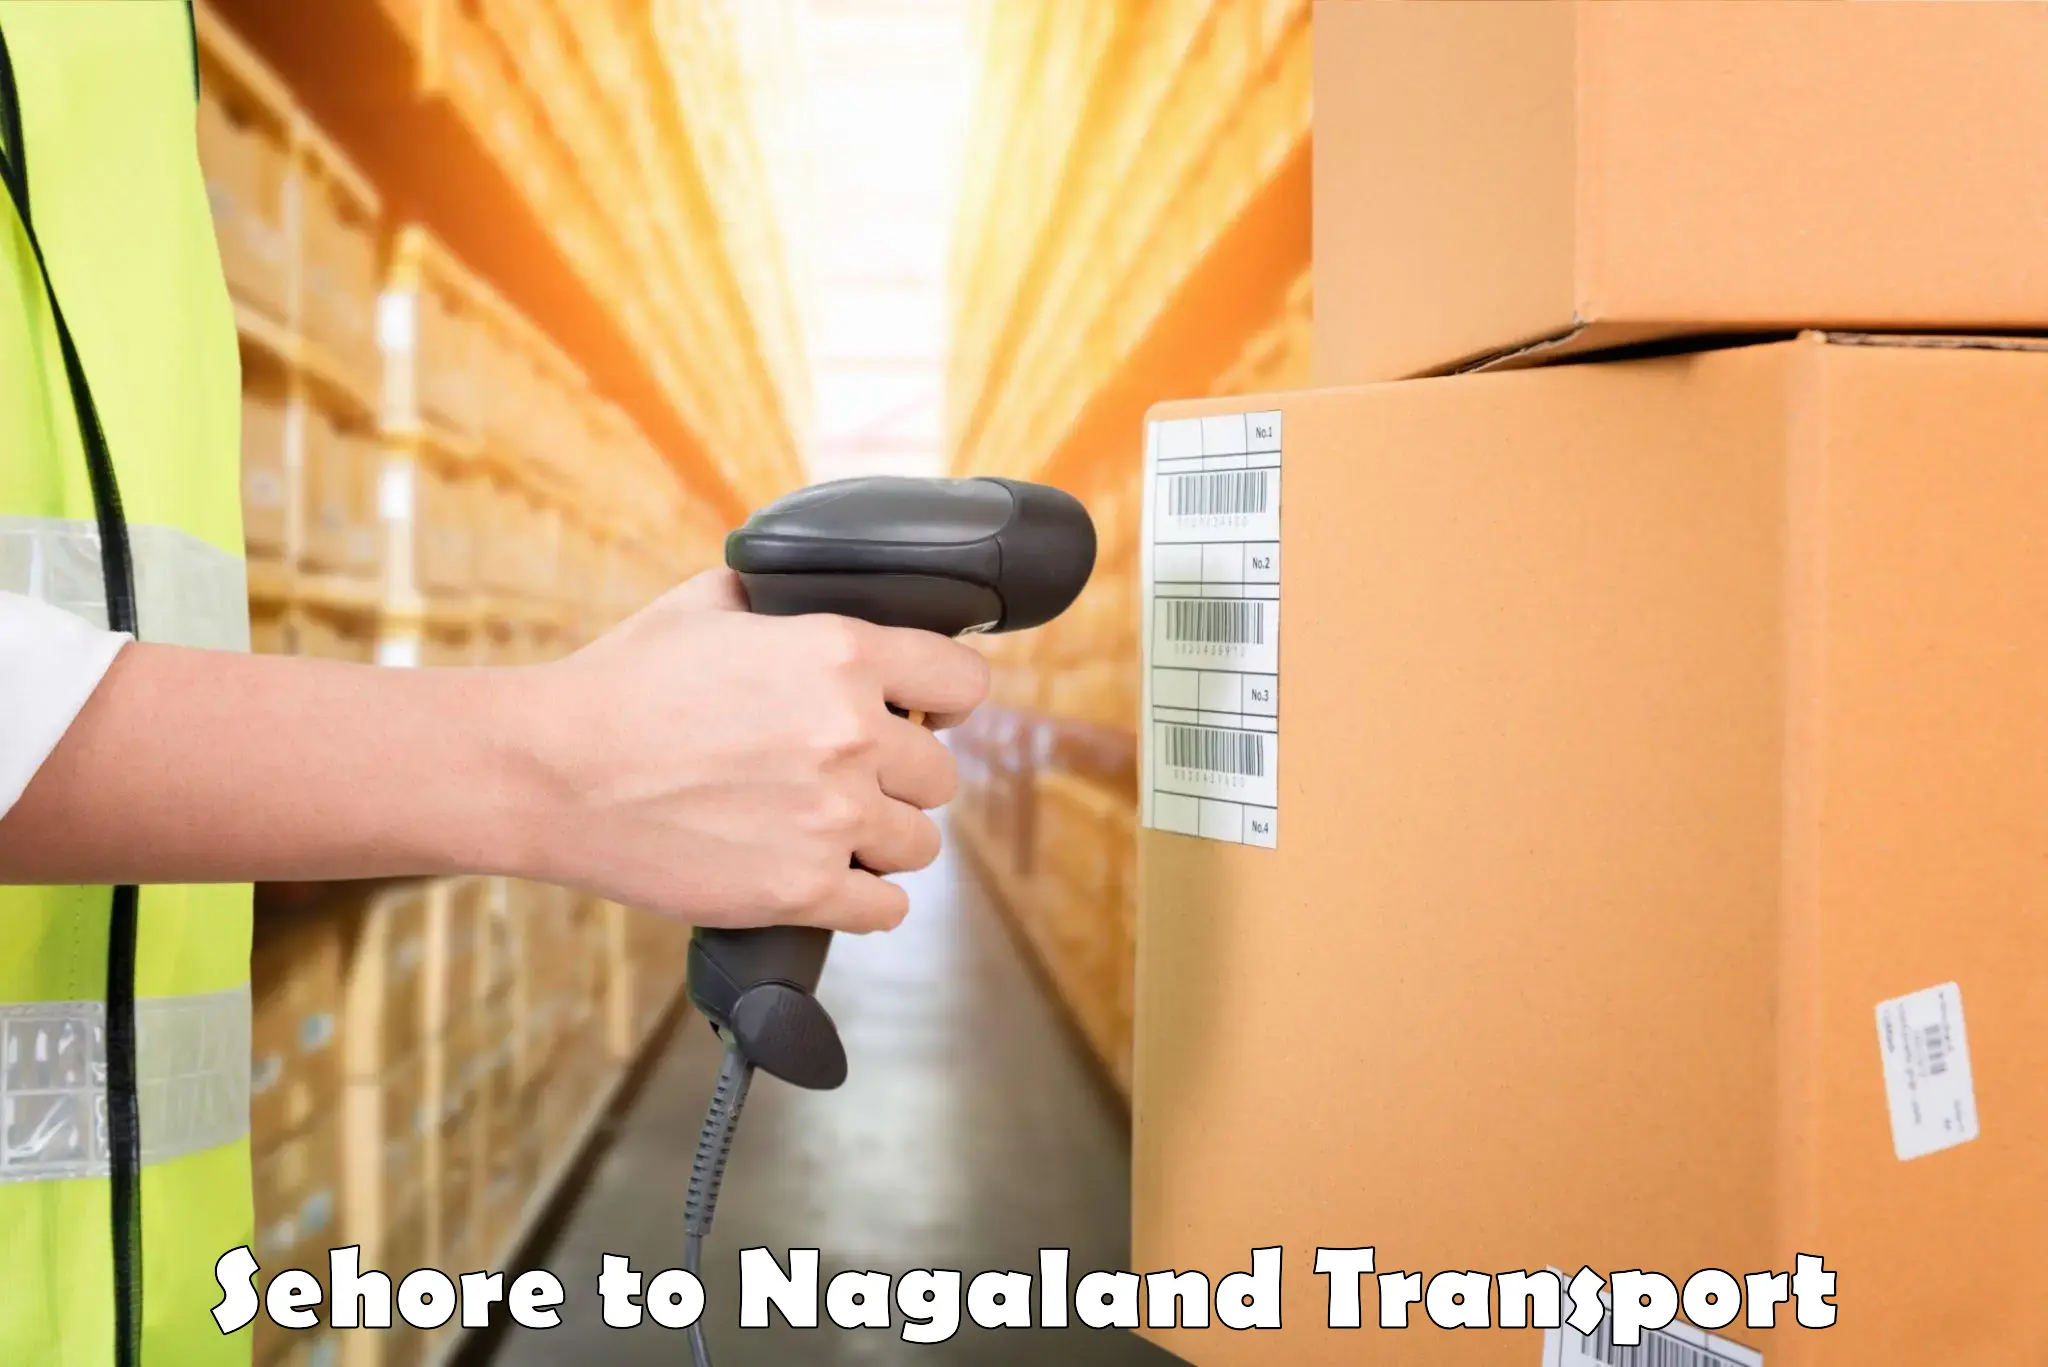 Transport shared services Sehore to Nagaland